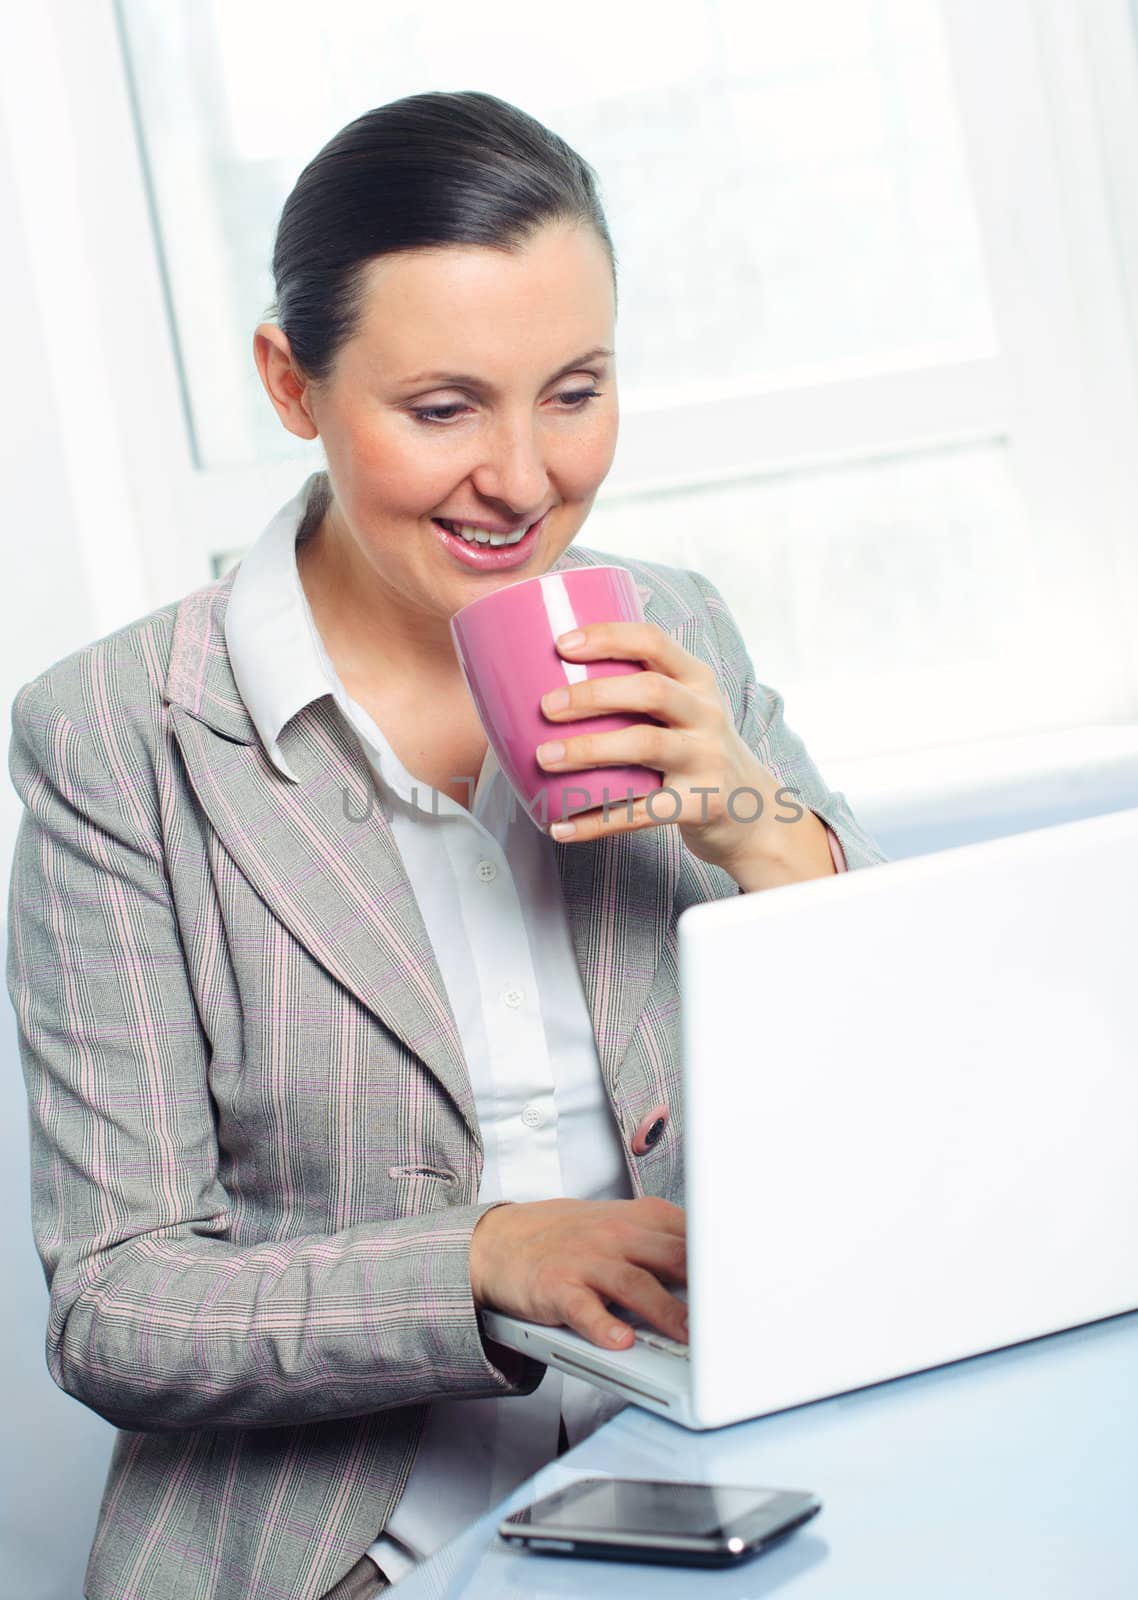 Attractive smiling young business woman with cup using laptop at work desk